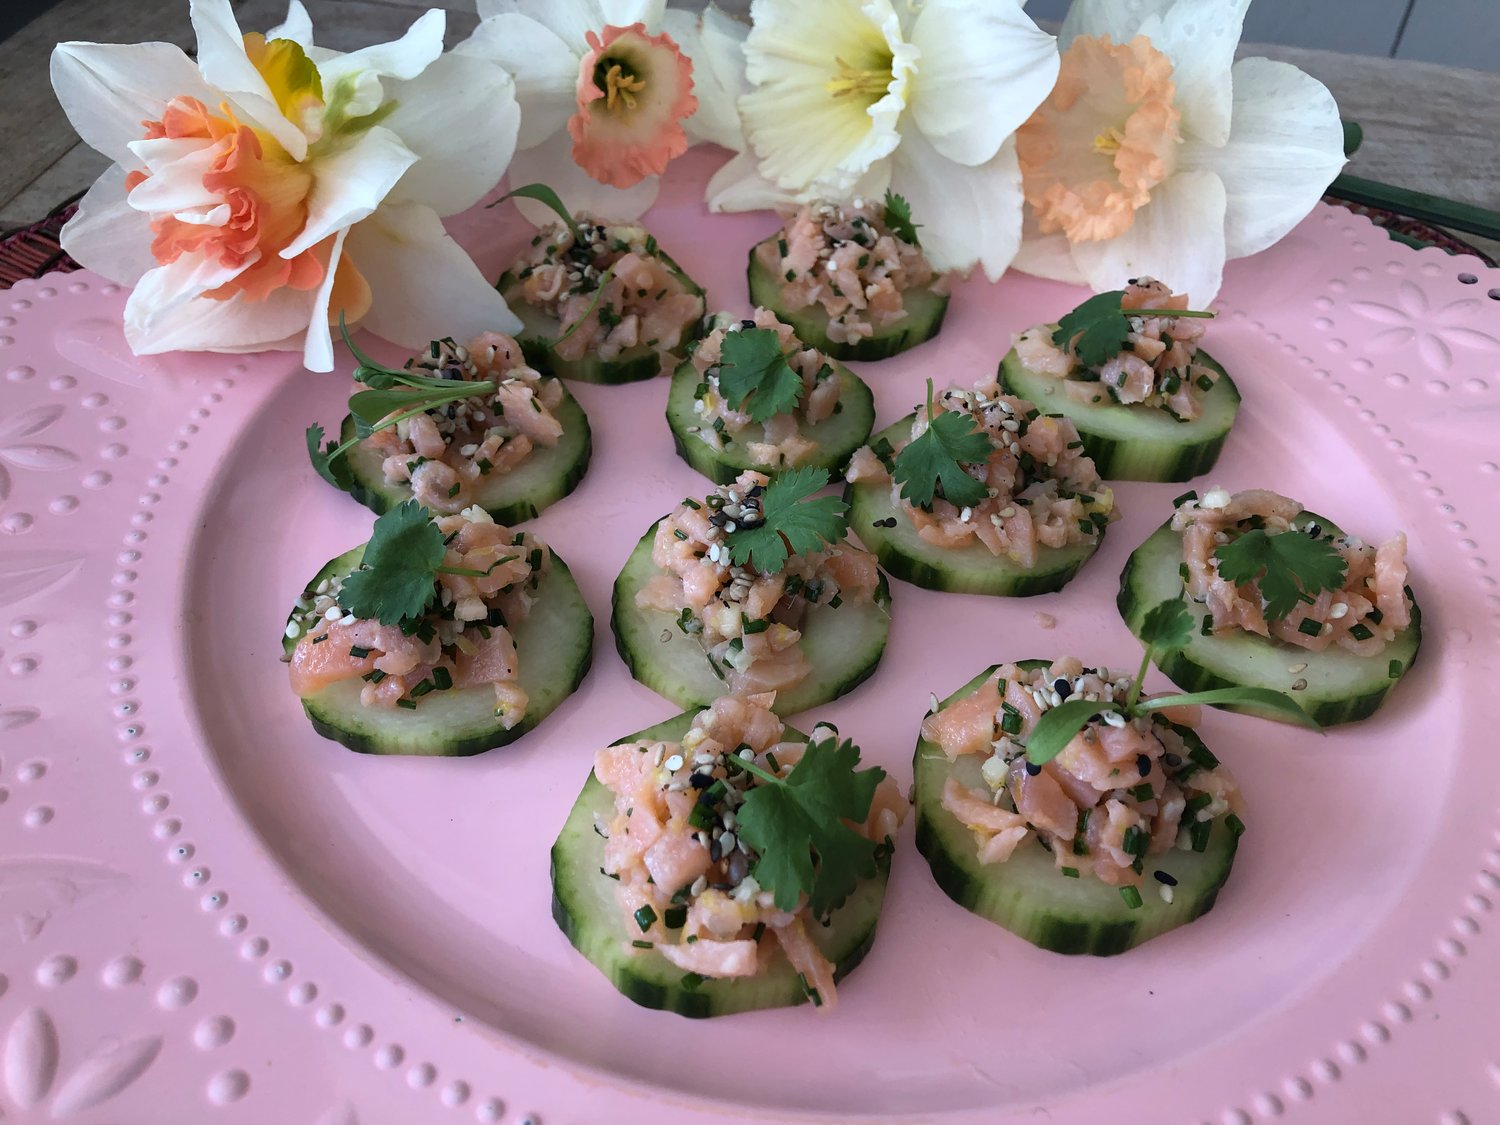 Smoked Salmon Tartare, served on cucumber rounds with sprigs of cilantro.